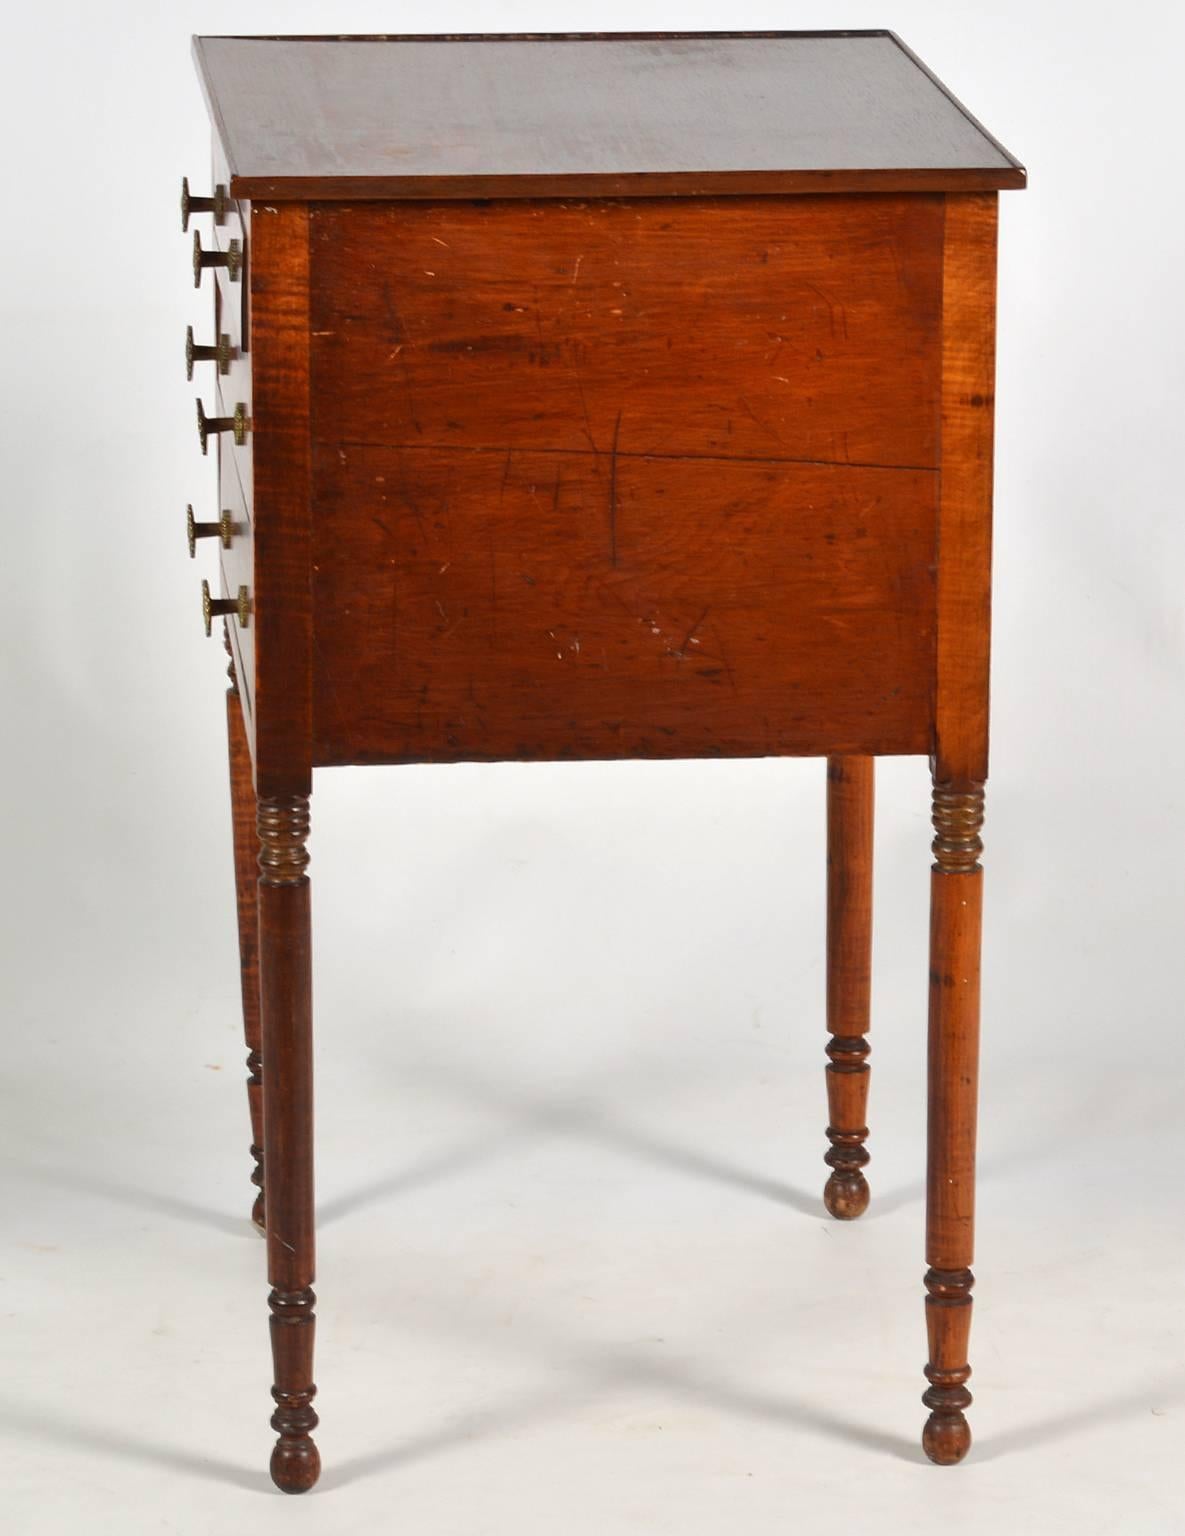 Of elegant proportions and great craftsmanship this Pennsylvania tiger maple and walnut work table features a tray edged top above three graduated drawers supported by slender circular turned legs.